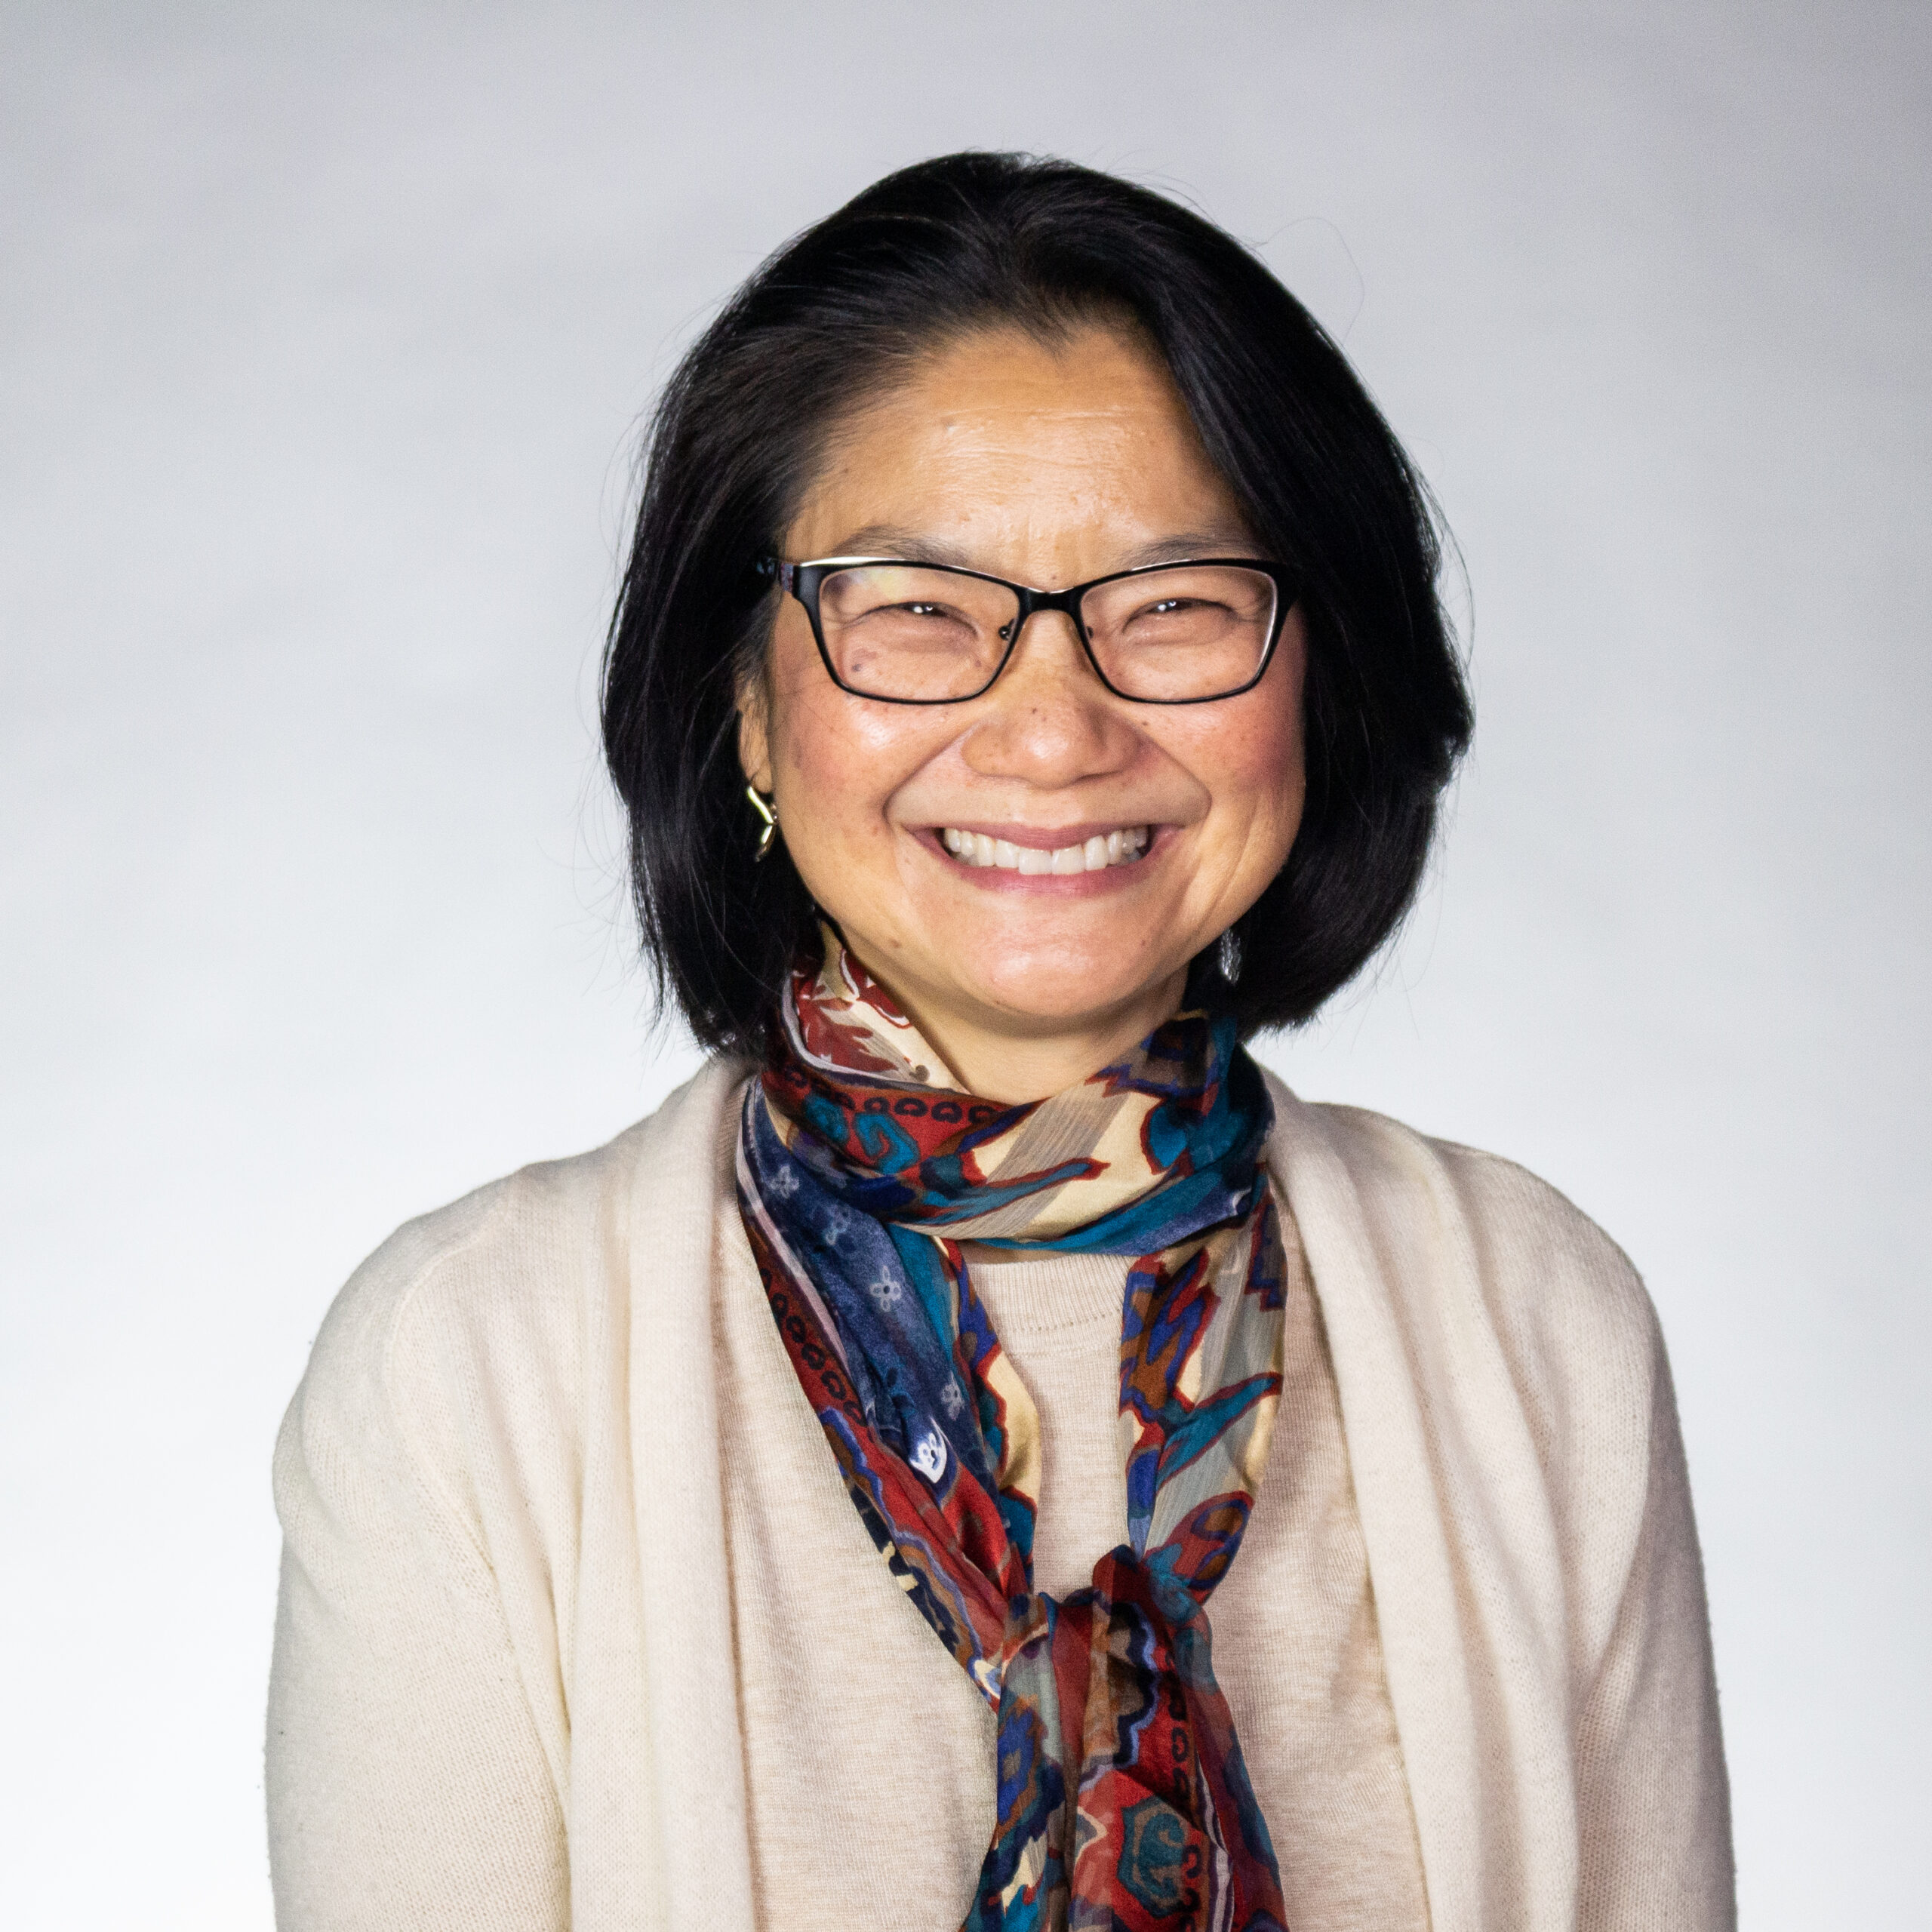 Ms. Margaret Chung